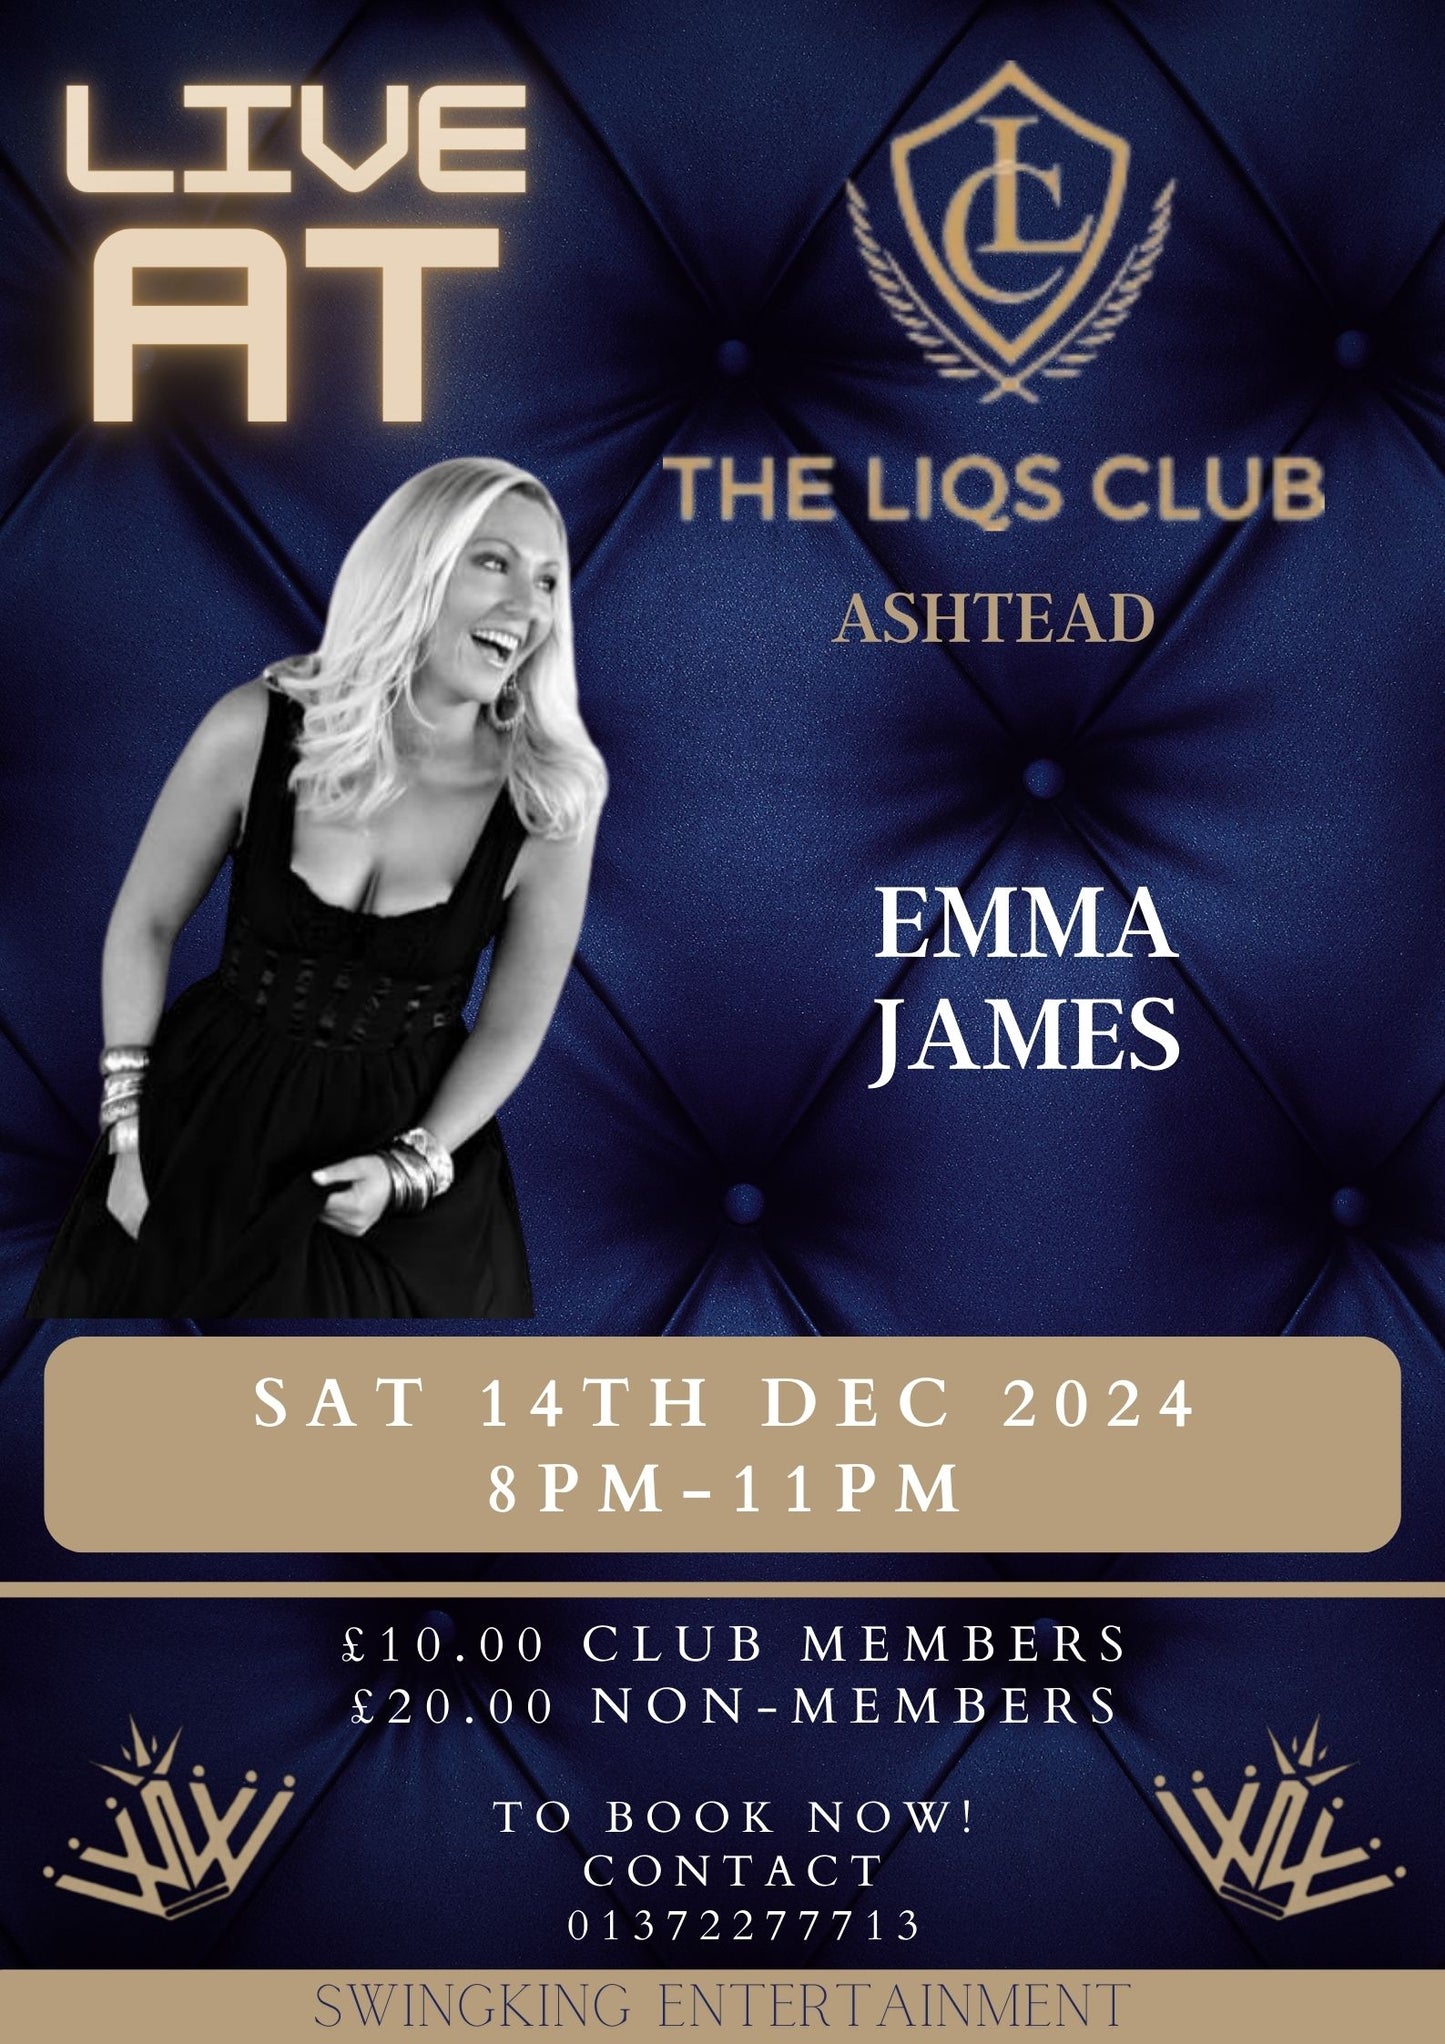 Live Music with Emma James - Saturday 14th December 2024